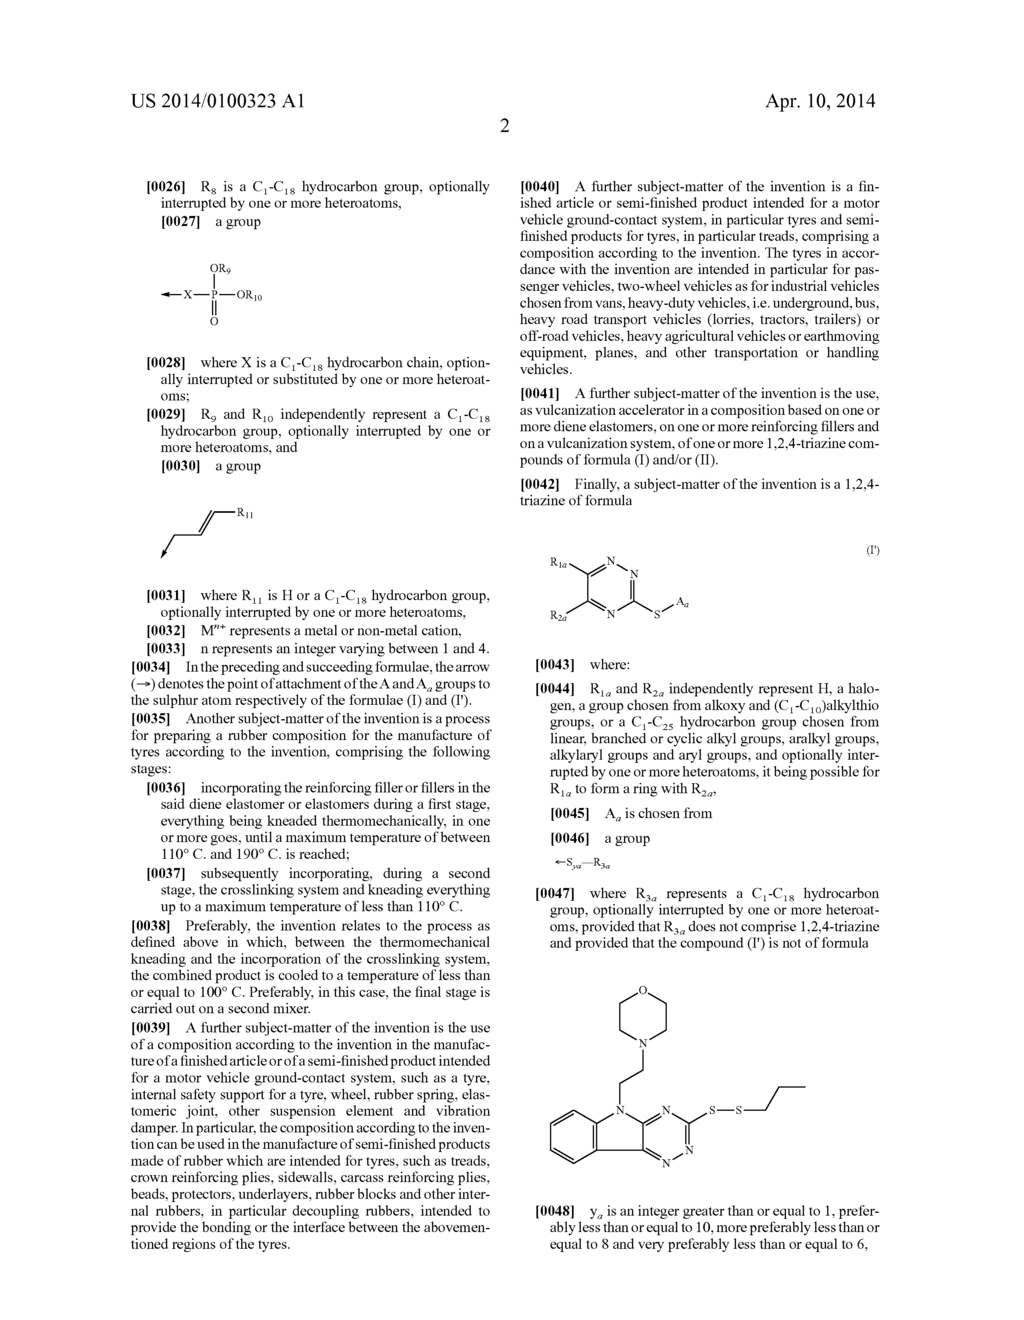 RUBBER COMPOSITION INCLUDING A 1,2,4-TRIAZINE DERIVATIVE - diagram, schematic, and image 03